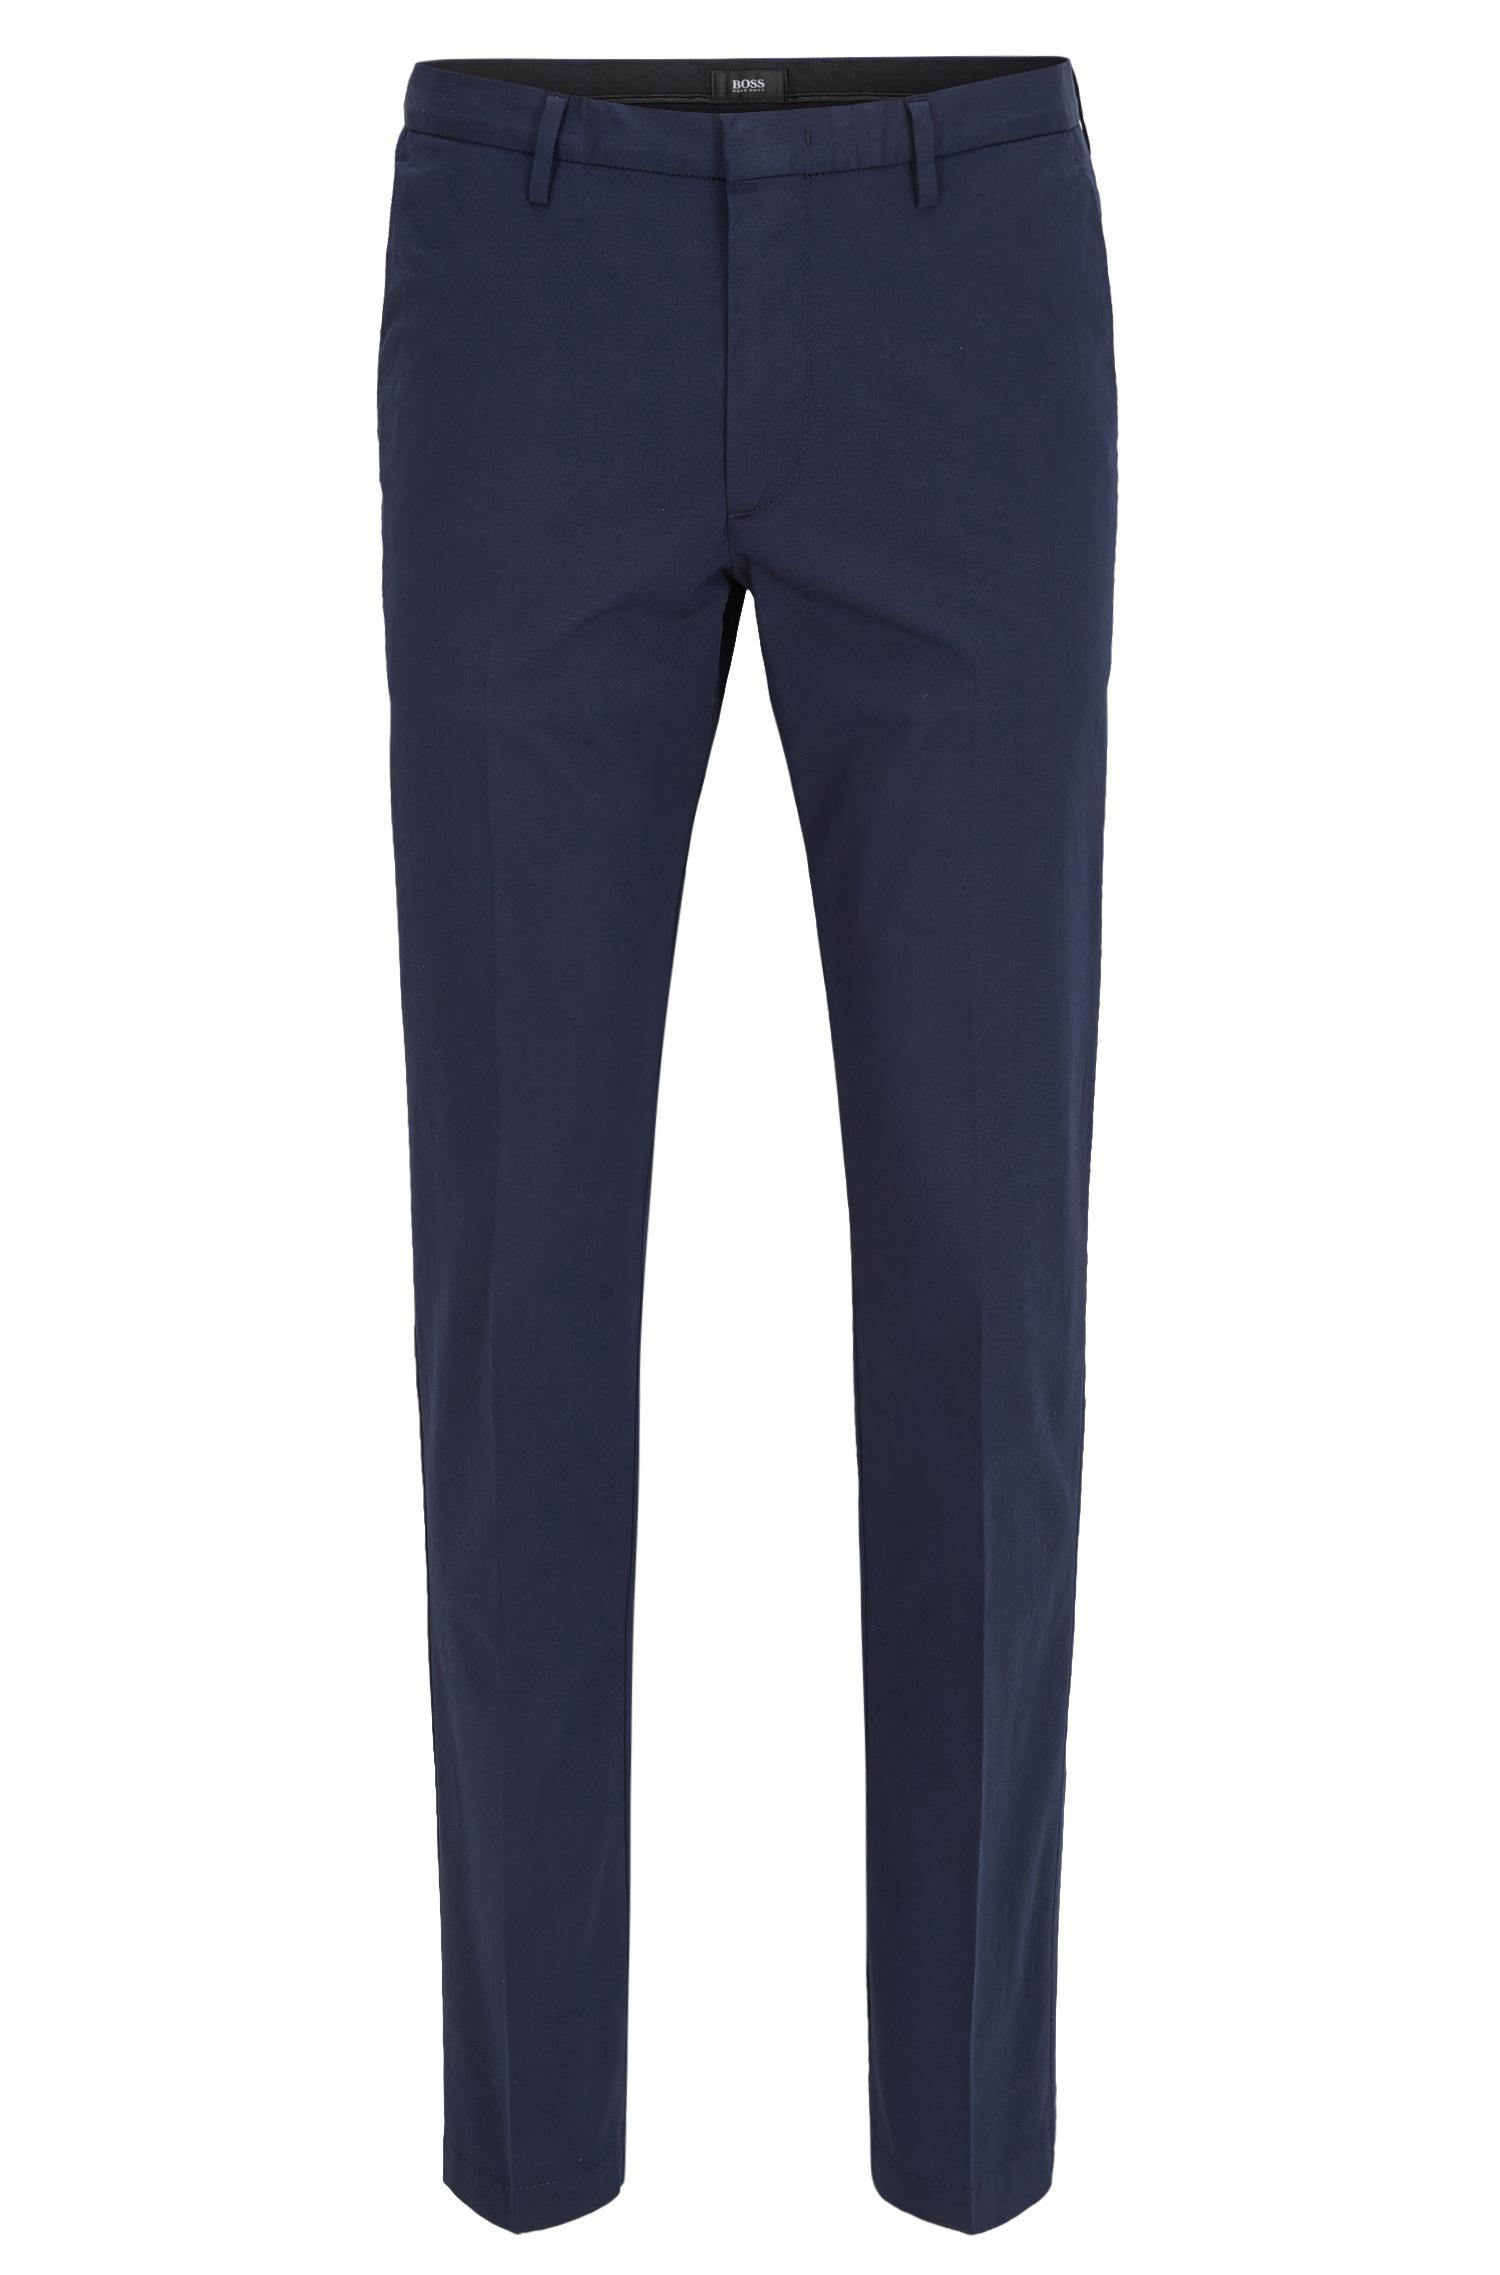 BOSS by HUGO BOSS Italian Stretch Cotton Pant, Slim Fit | Kaito Travel W in  Blue for Men | Lyst